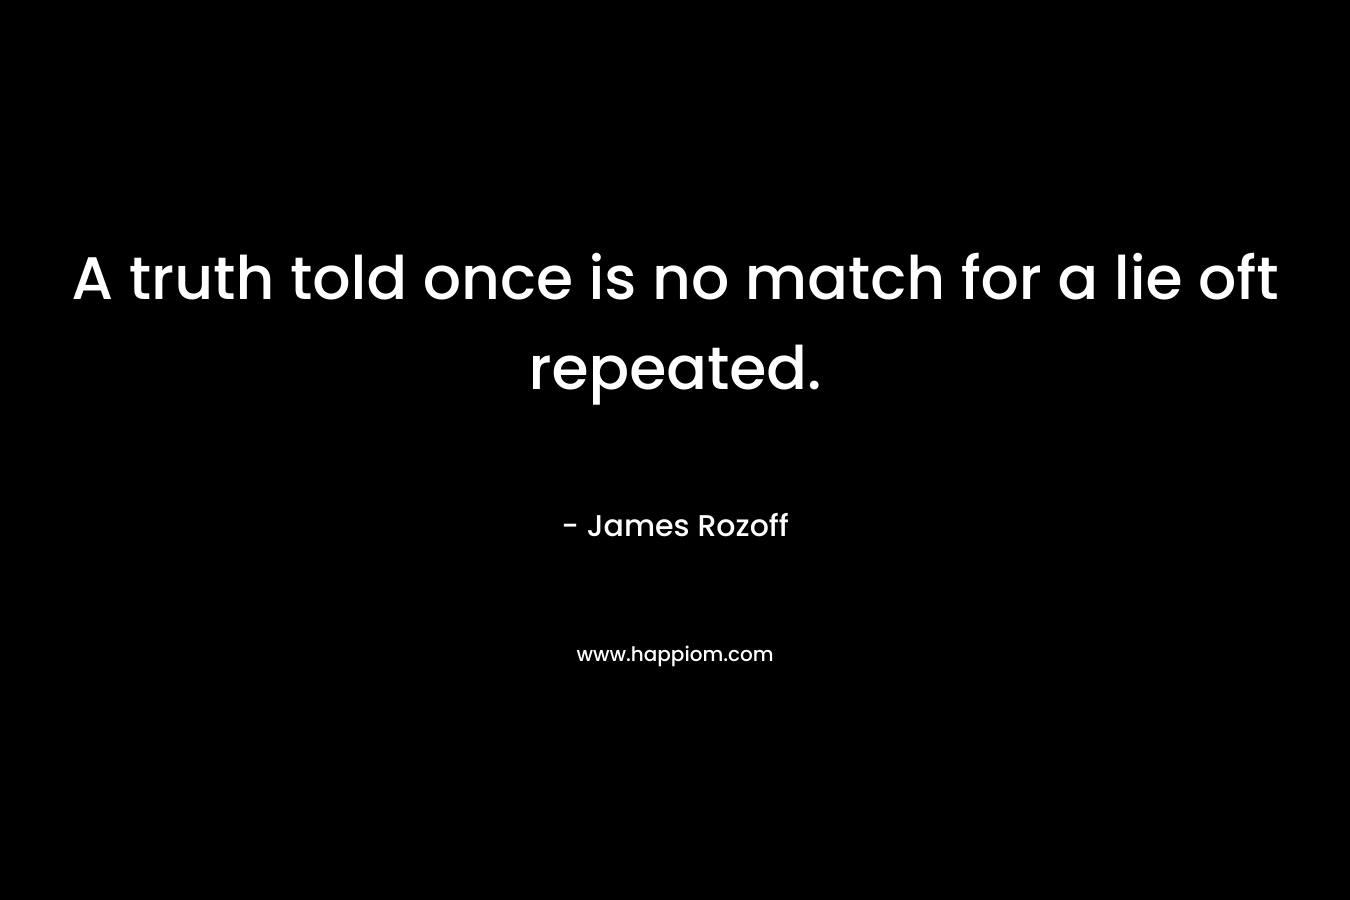 A truth told once is no match for a lie oft repeated. – James Rozoff